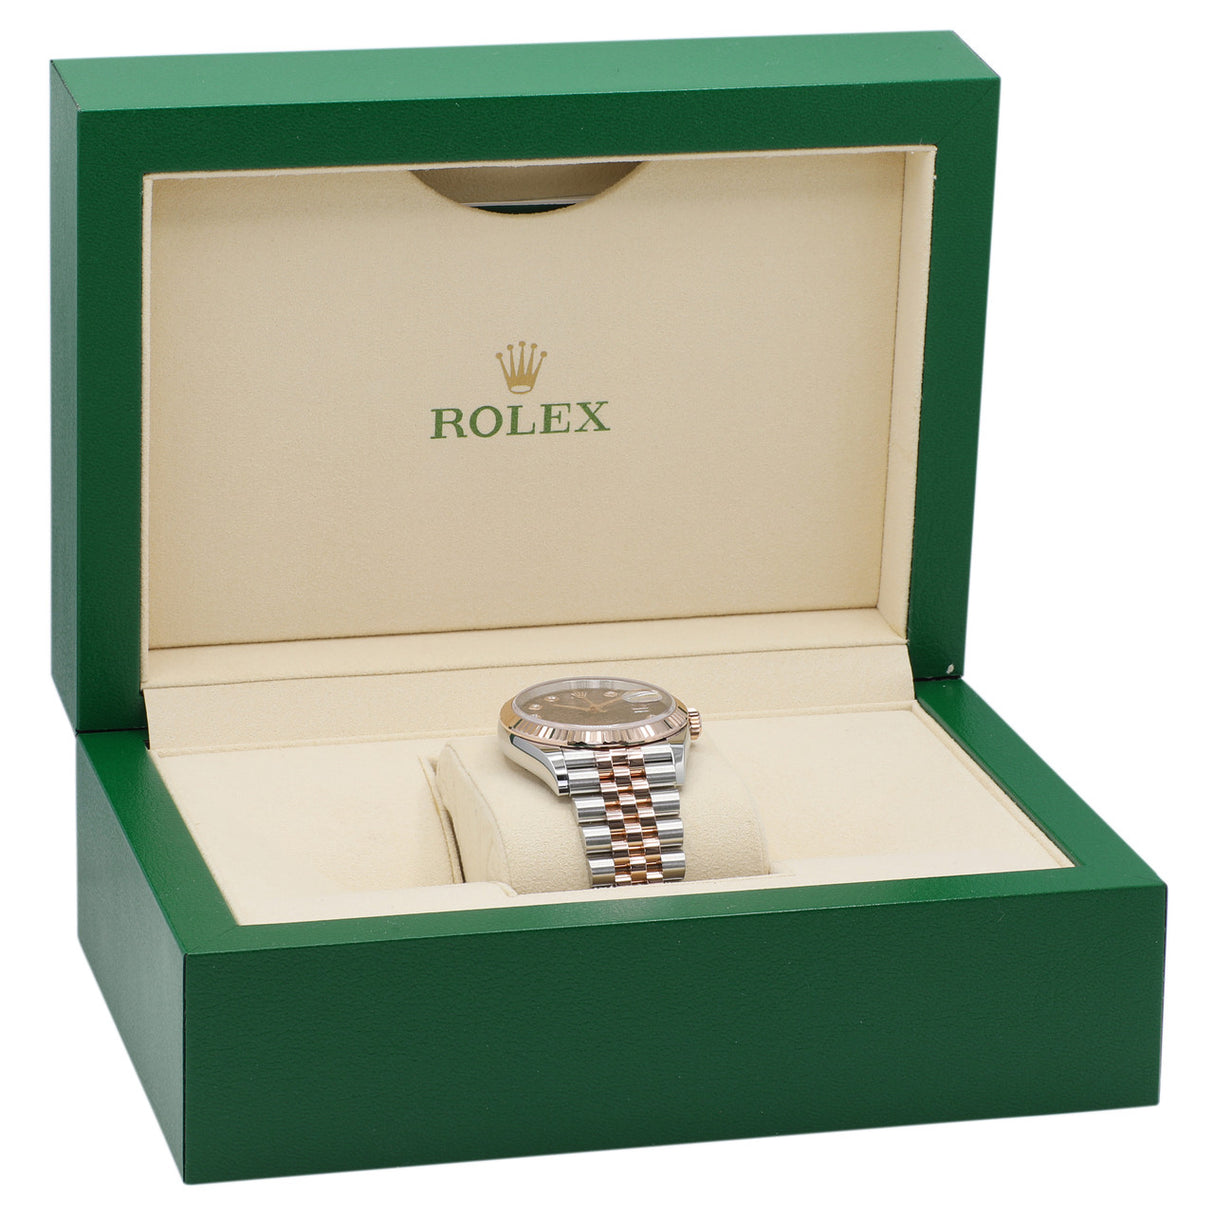 Rolex 18K Rose Gold Stainless Steel Datejust 36 126231